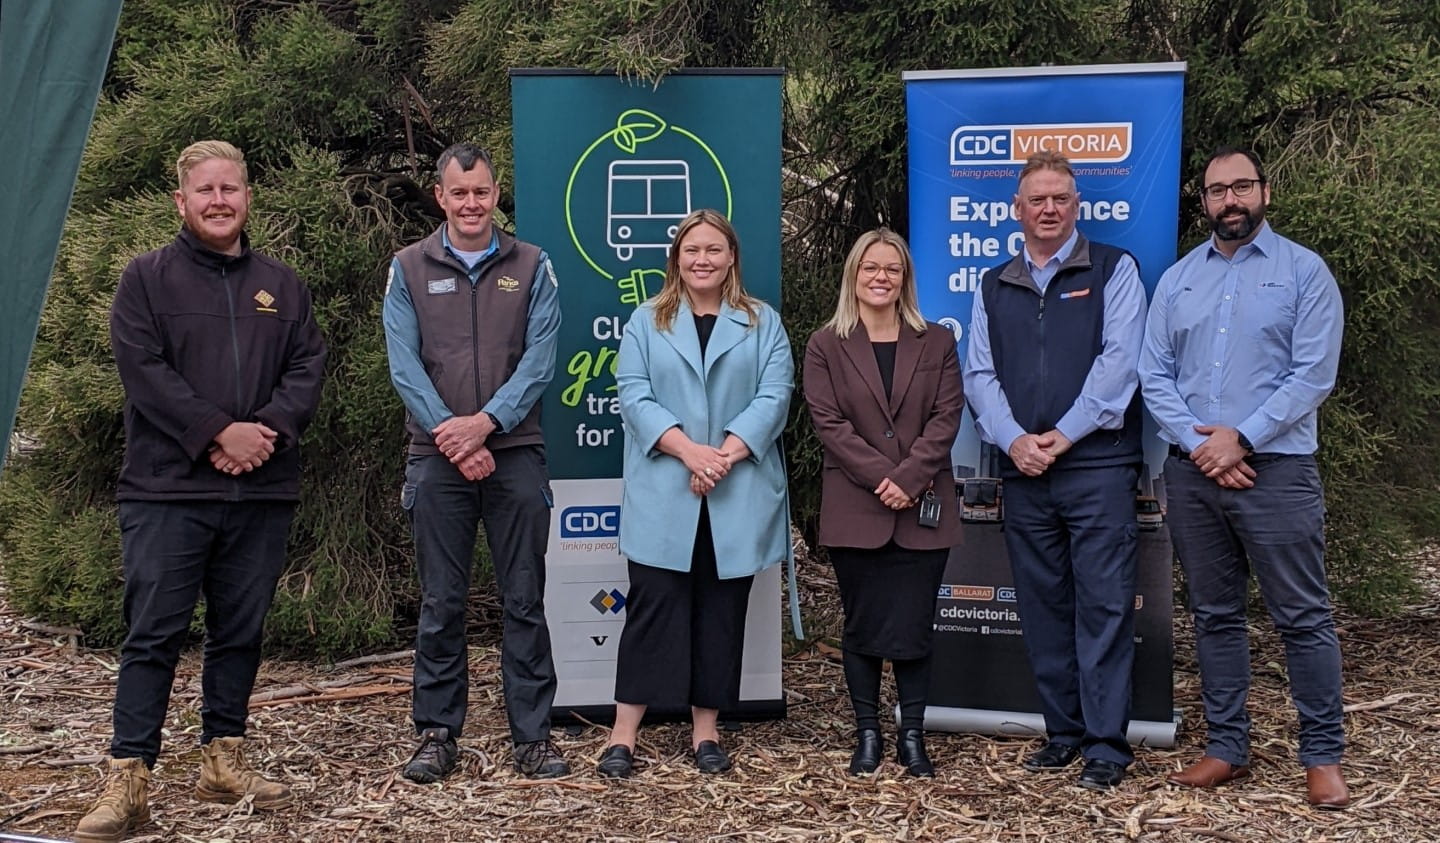 From left to right: Wadawurrung Traditional Owners Aboriginal Corporation General Manager Greg Robinson, Parks Victoria District Manager Stuart Lardner, Member for Lara Ella George, CDC Victoria's Jess Brzezicki, CDC Victoria CEO Jeff Wilson, and CMV Group's Nick Curran at Serendip Sanctuary to announce a new sensory garden.